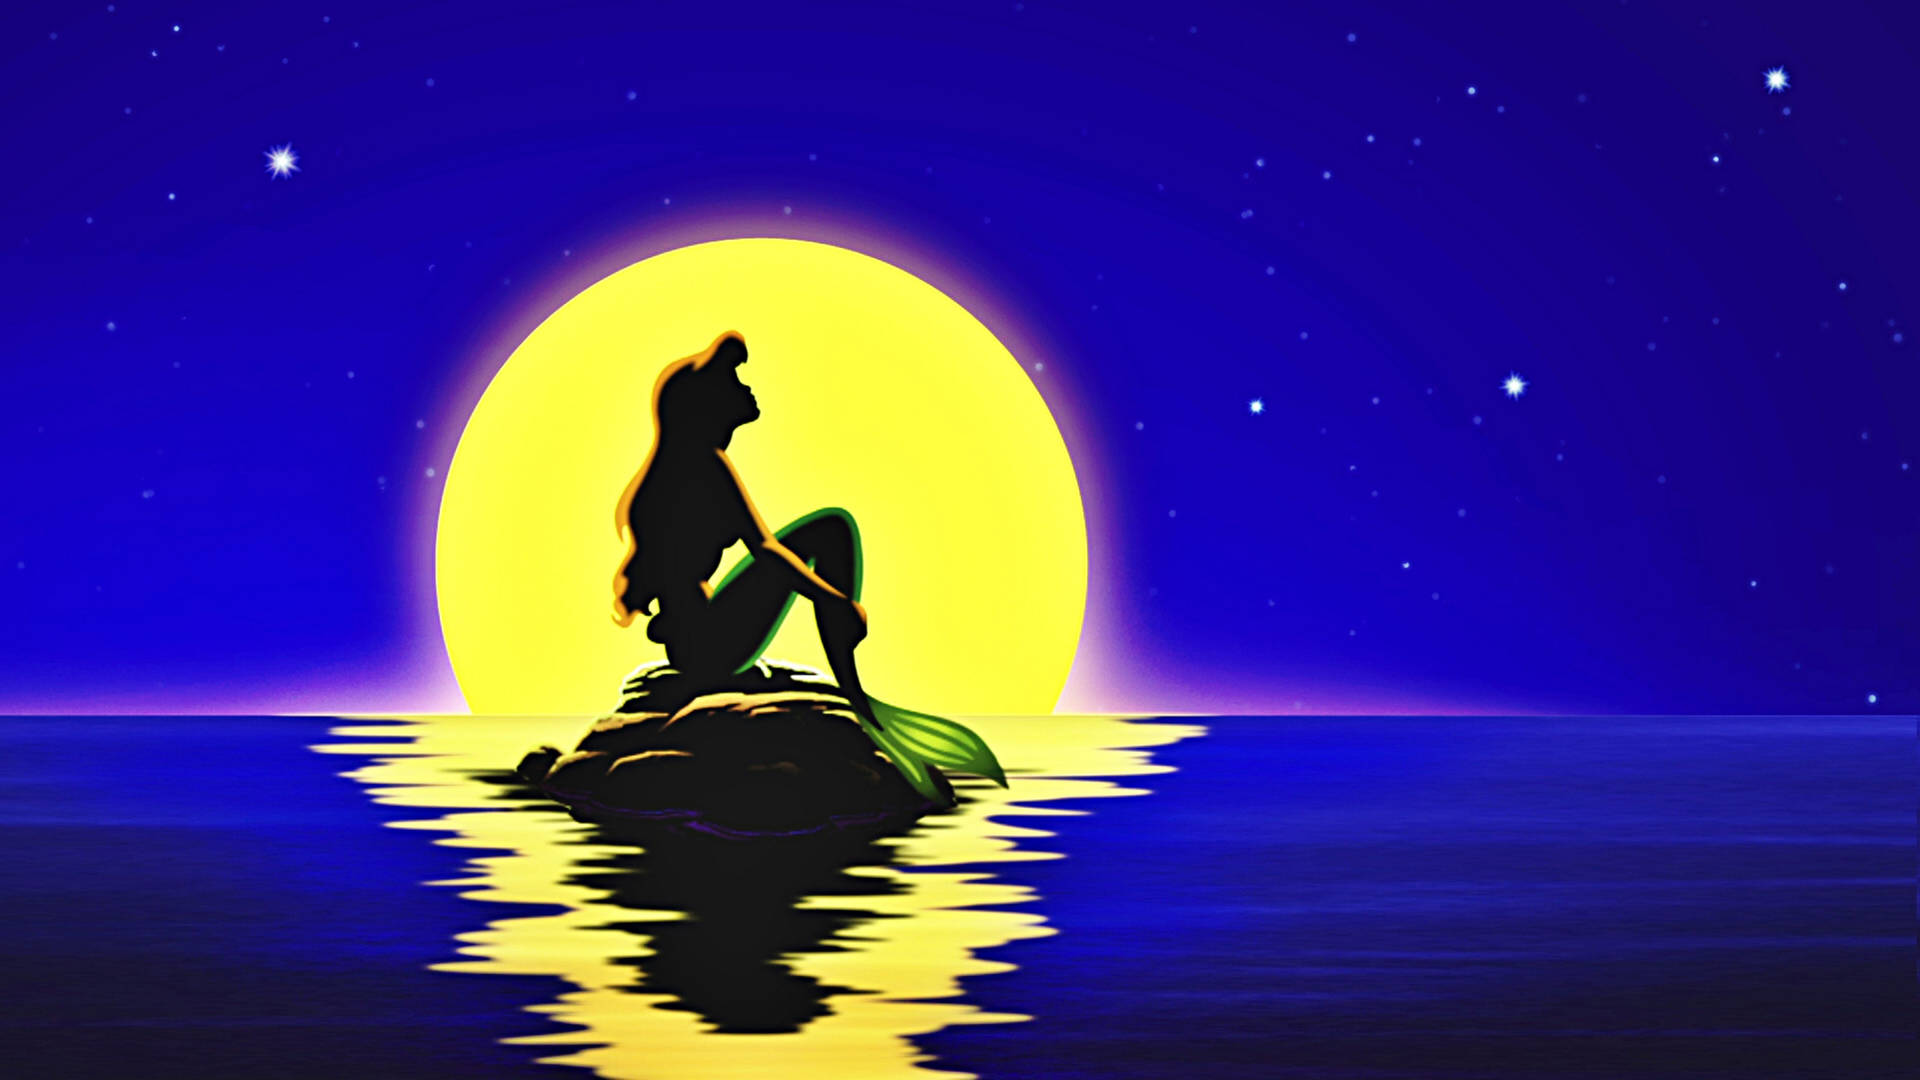 The Little Mermaid At Night Background